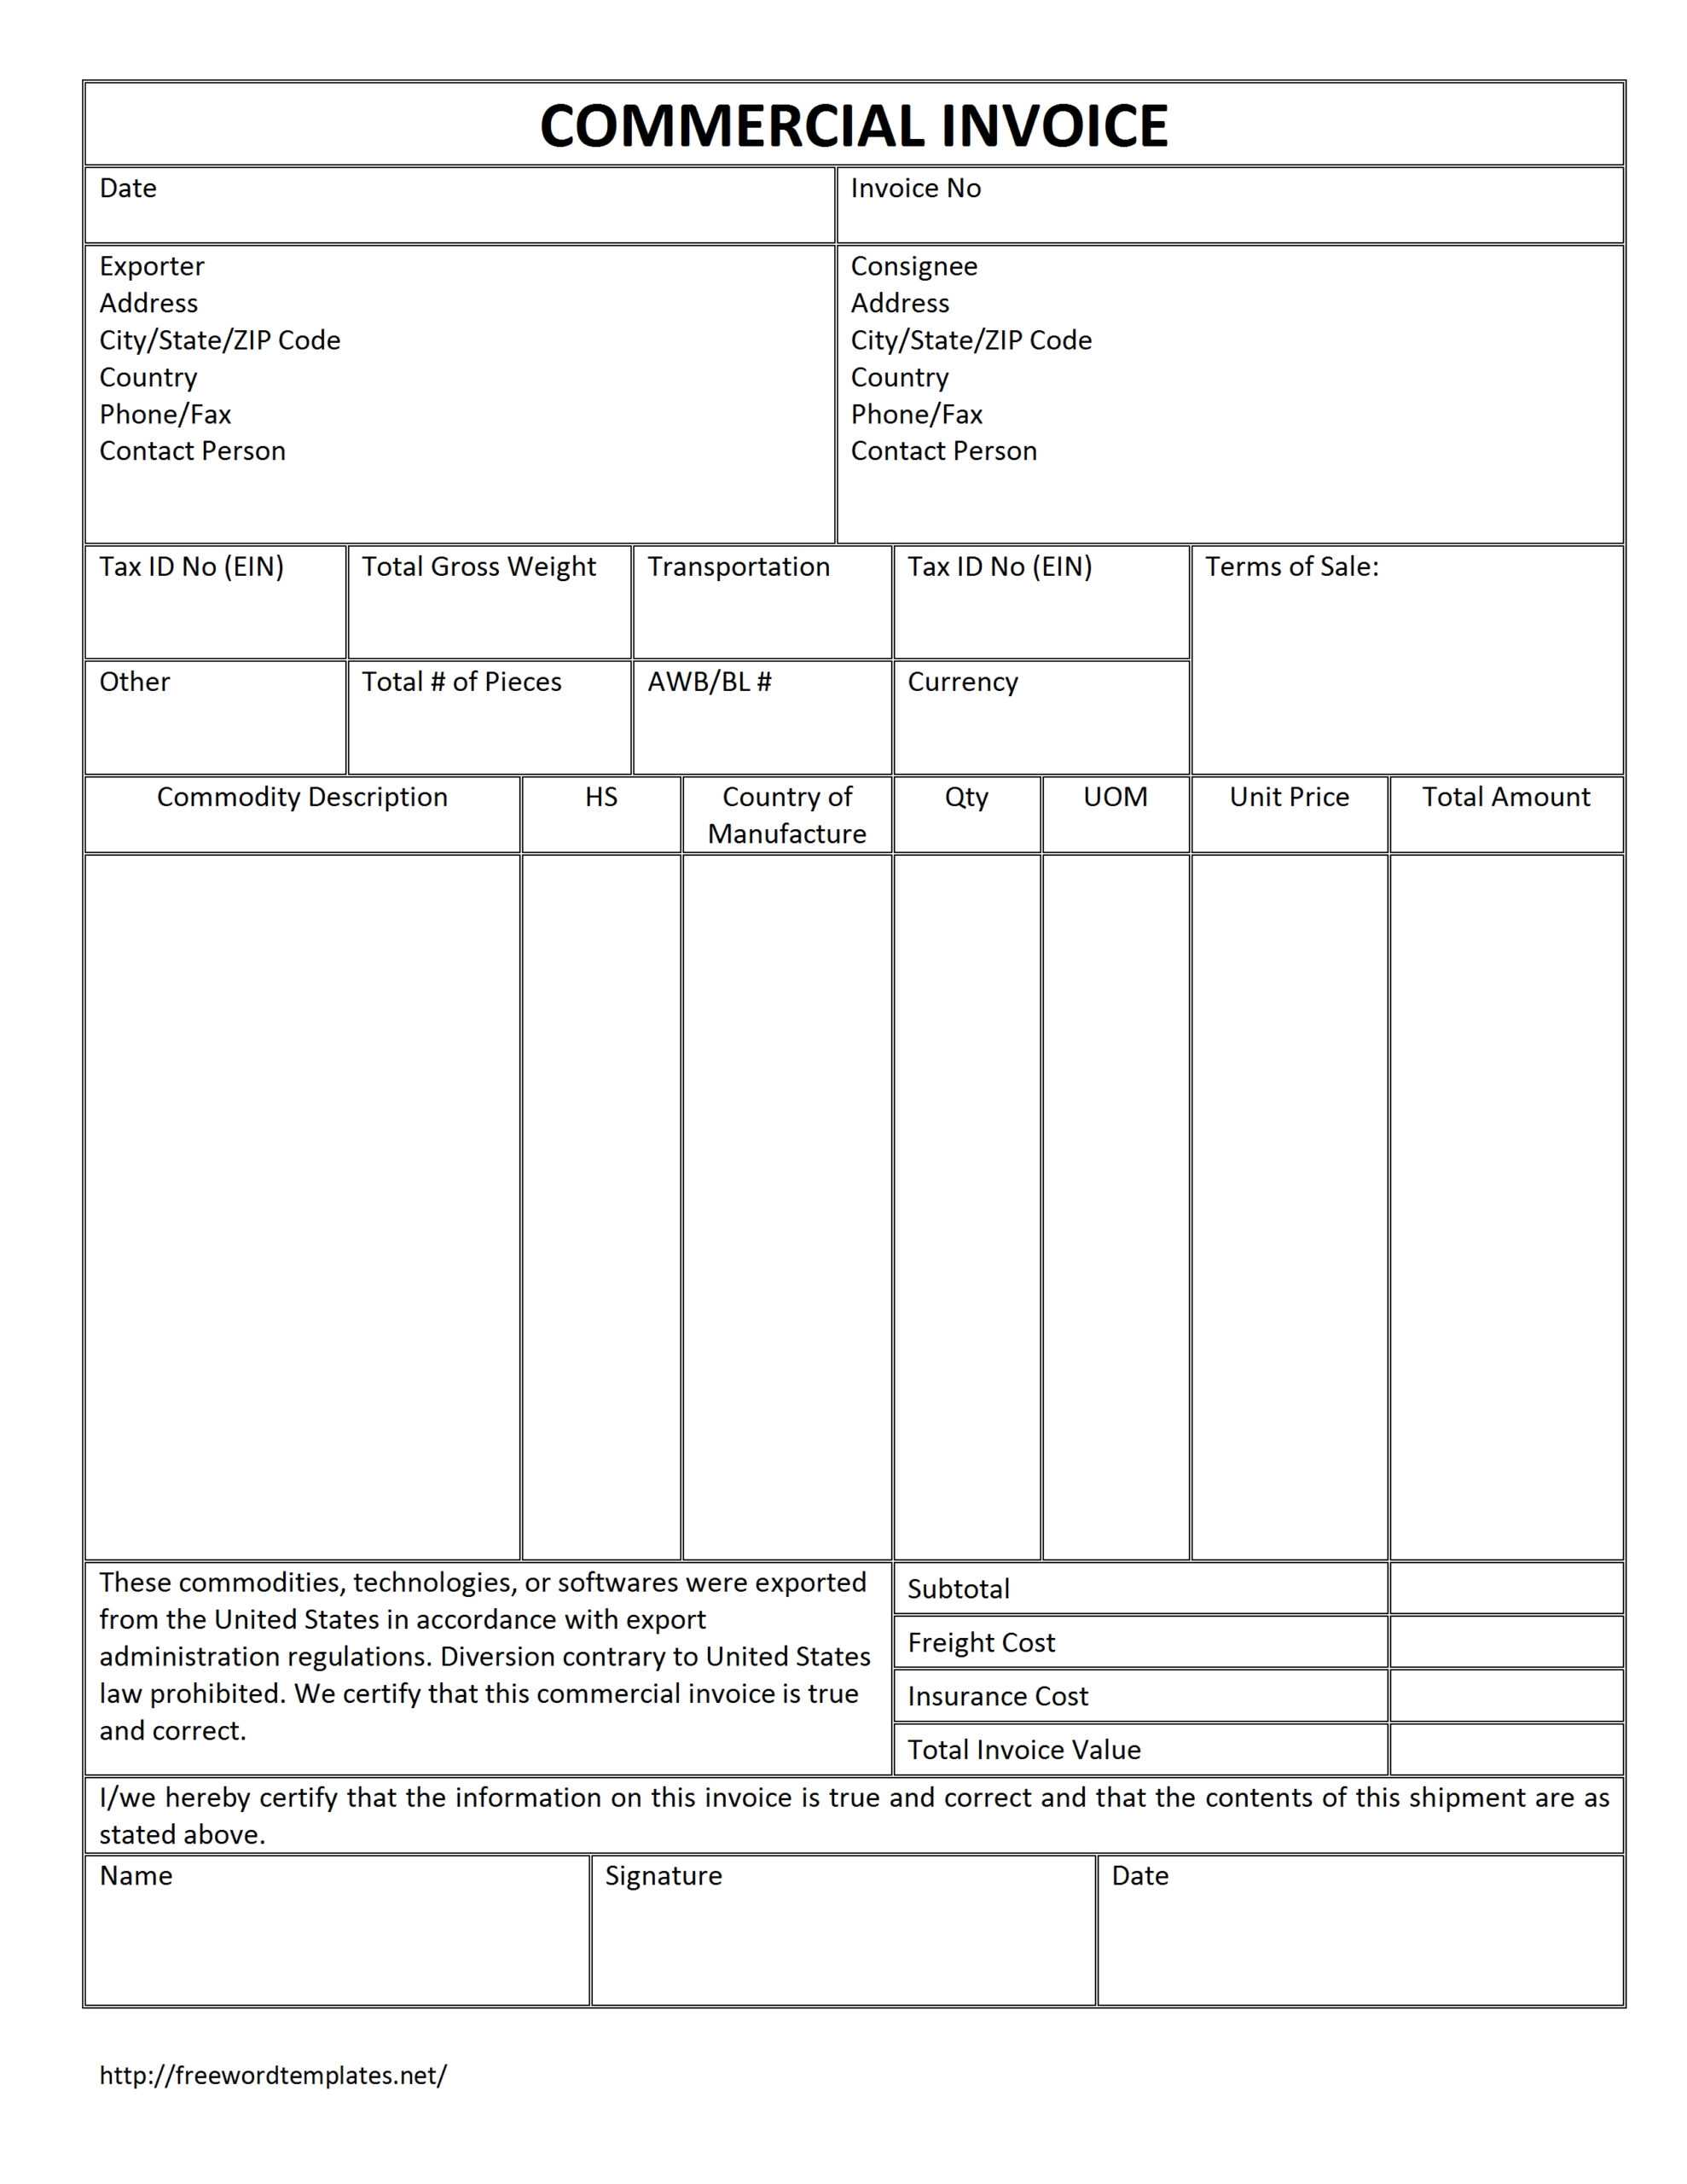 Microsoft Invoices Microsoft Word Invoice Template Regarding Commercial Invoice Template Word Doc